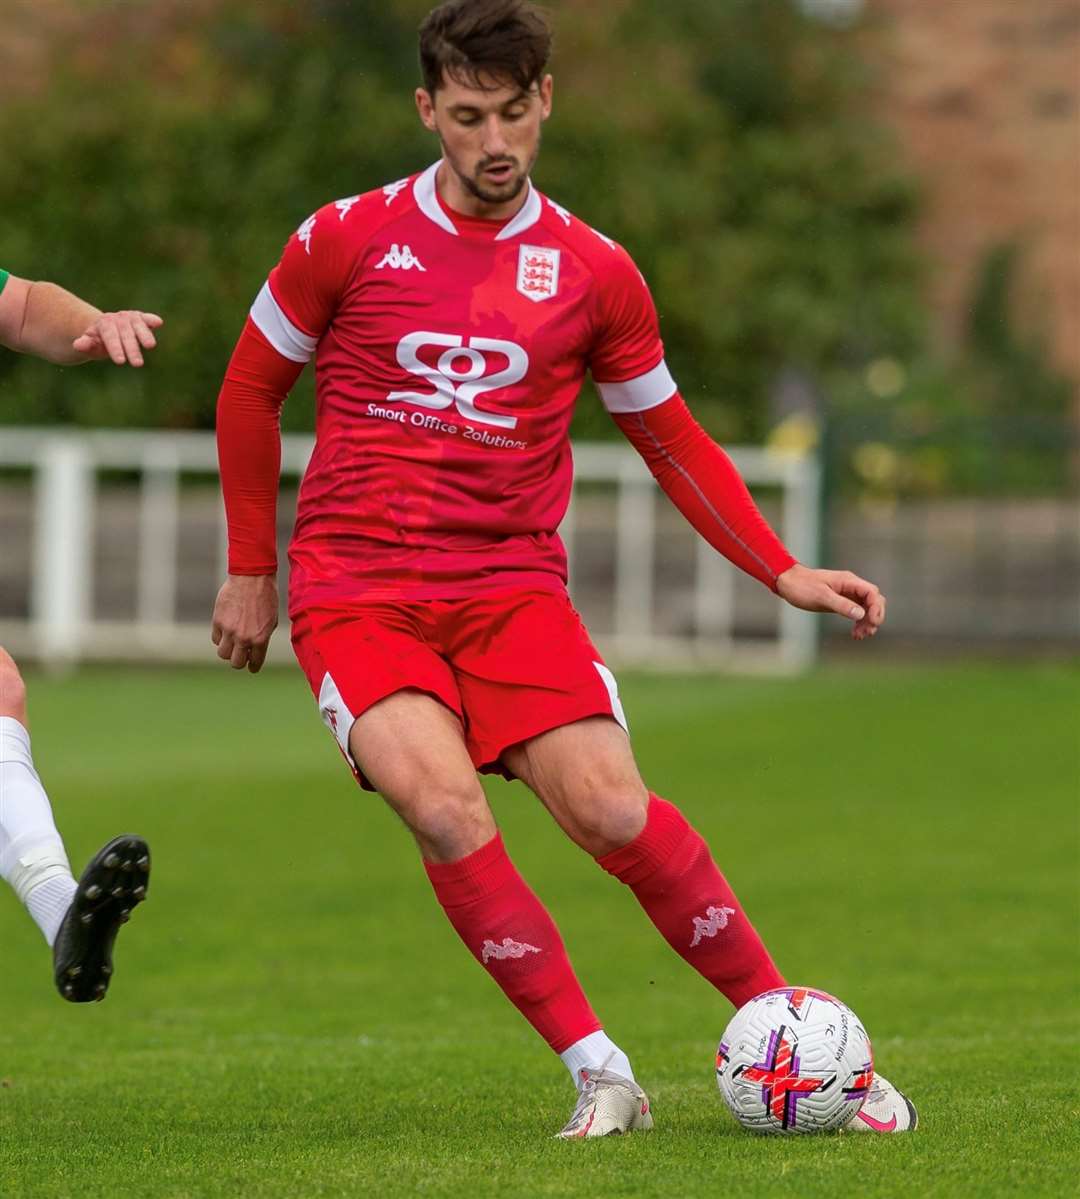 Midfielder Sam Hasler, who scored twice in the Lilywhites’ 2-1 win over Whitstable earlier this season, has returned from a lengthy suspension. Picture: Ian Scammell